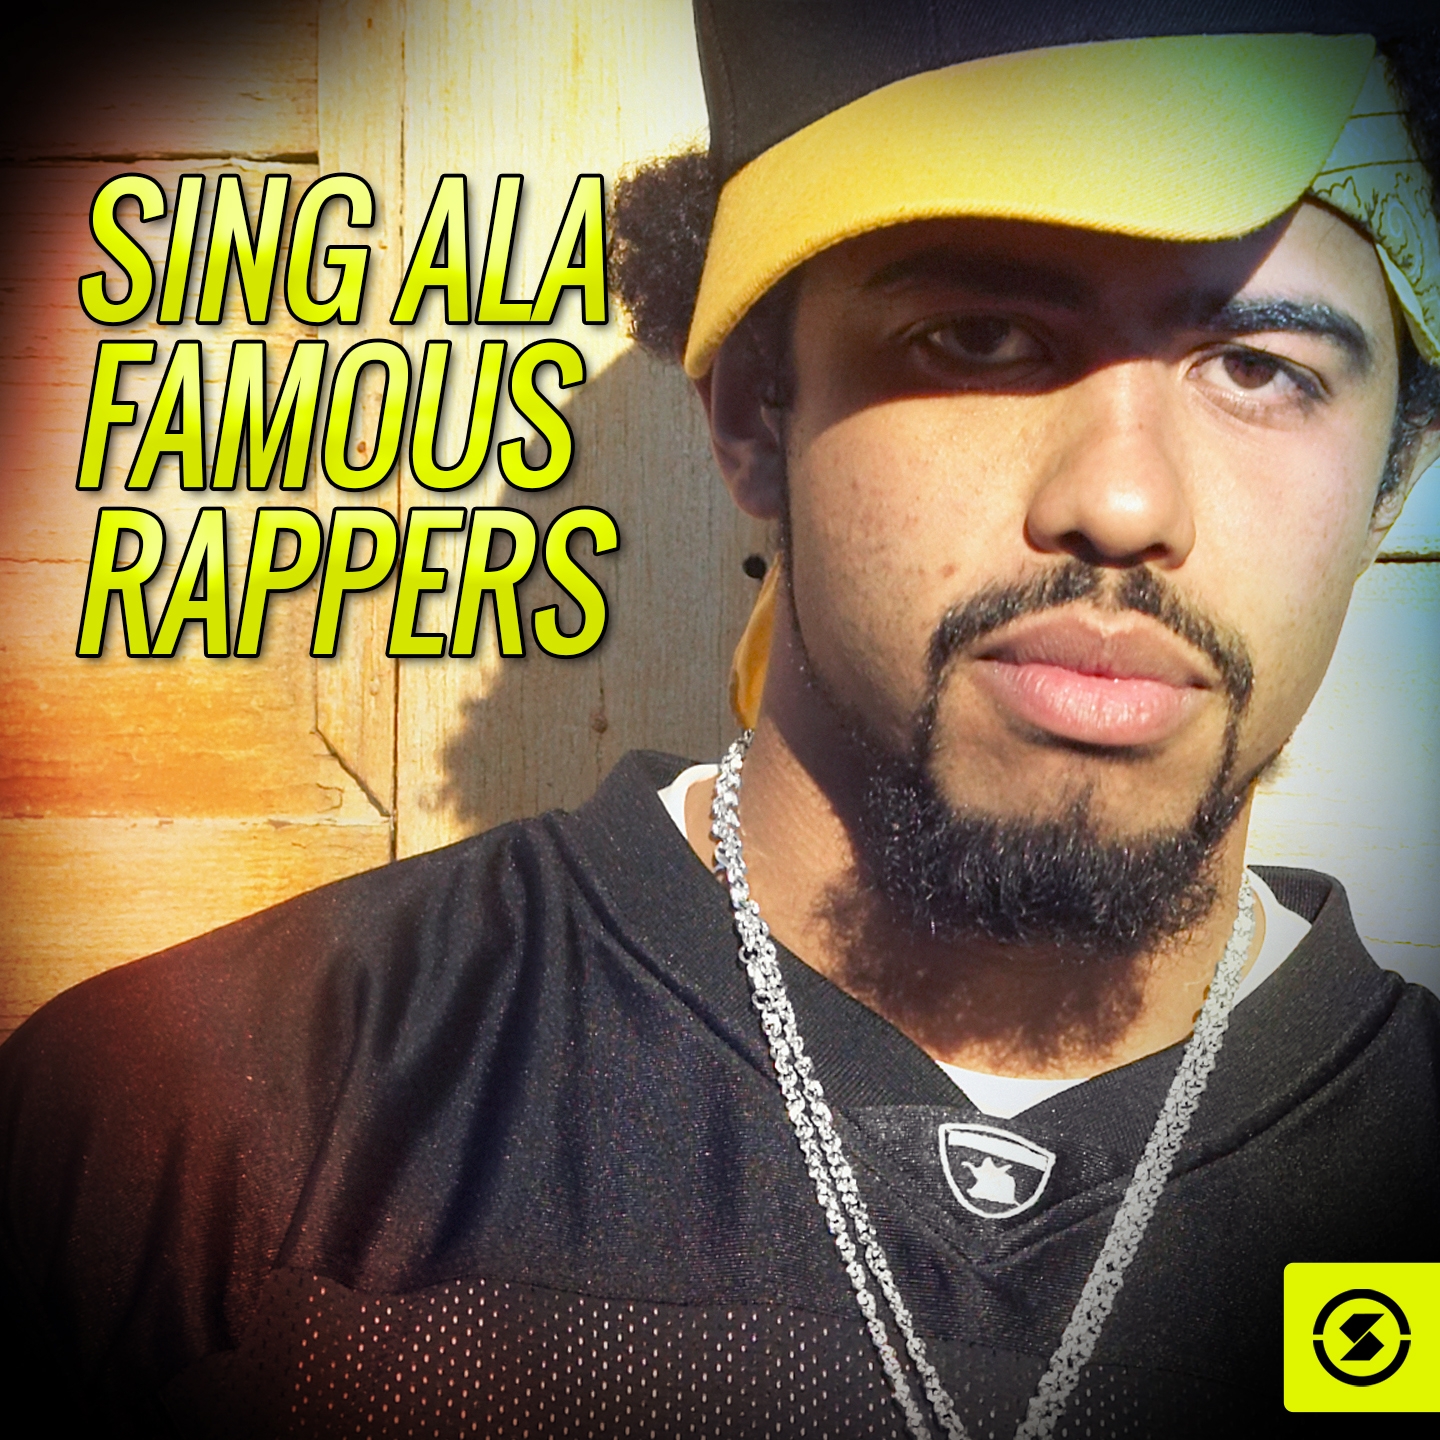 Sing Ala Famous Rappers